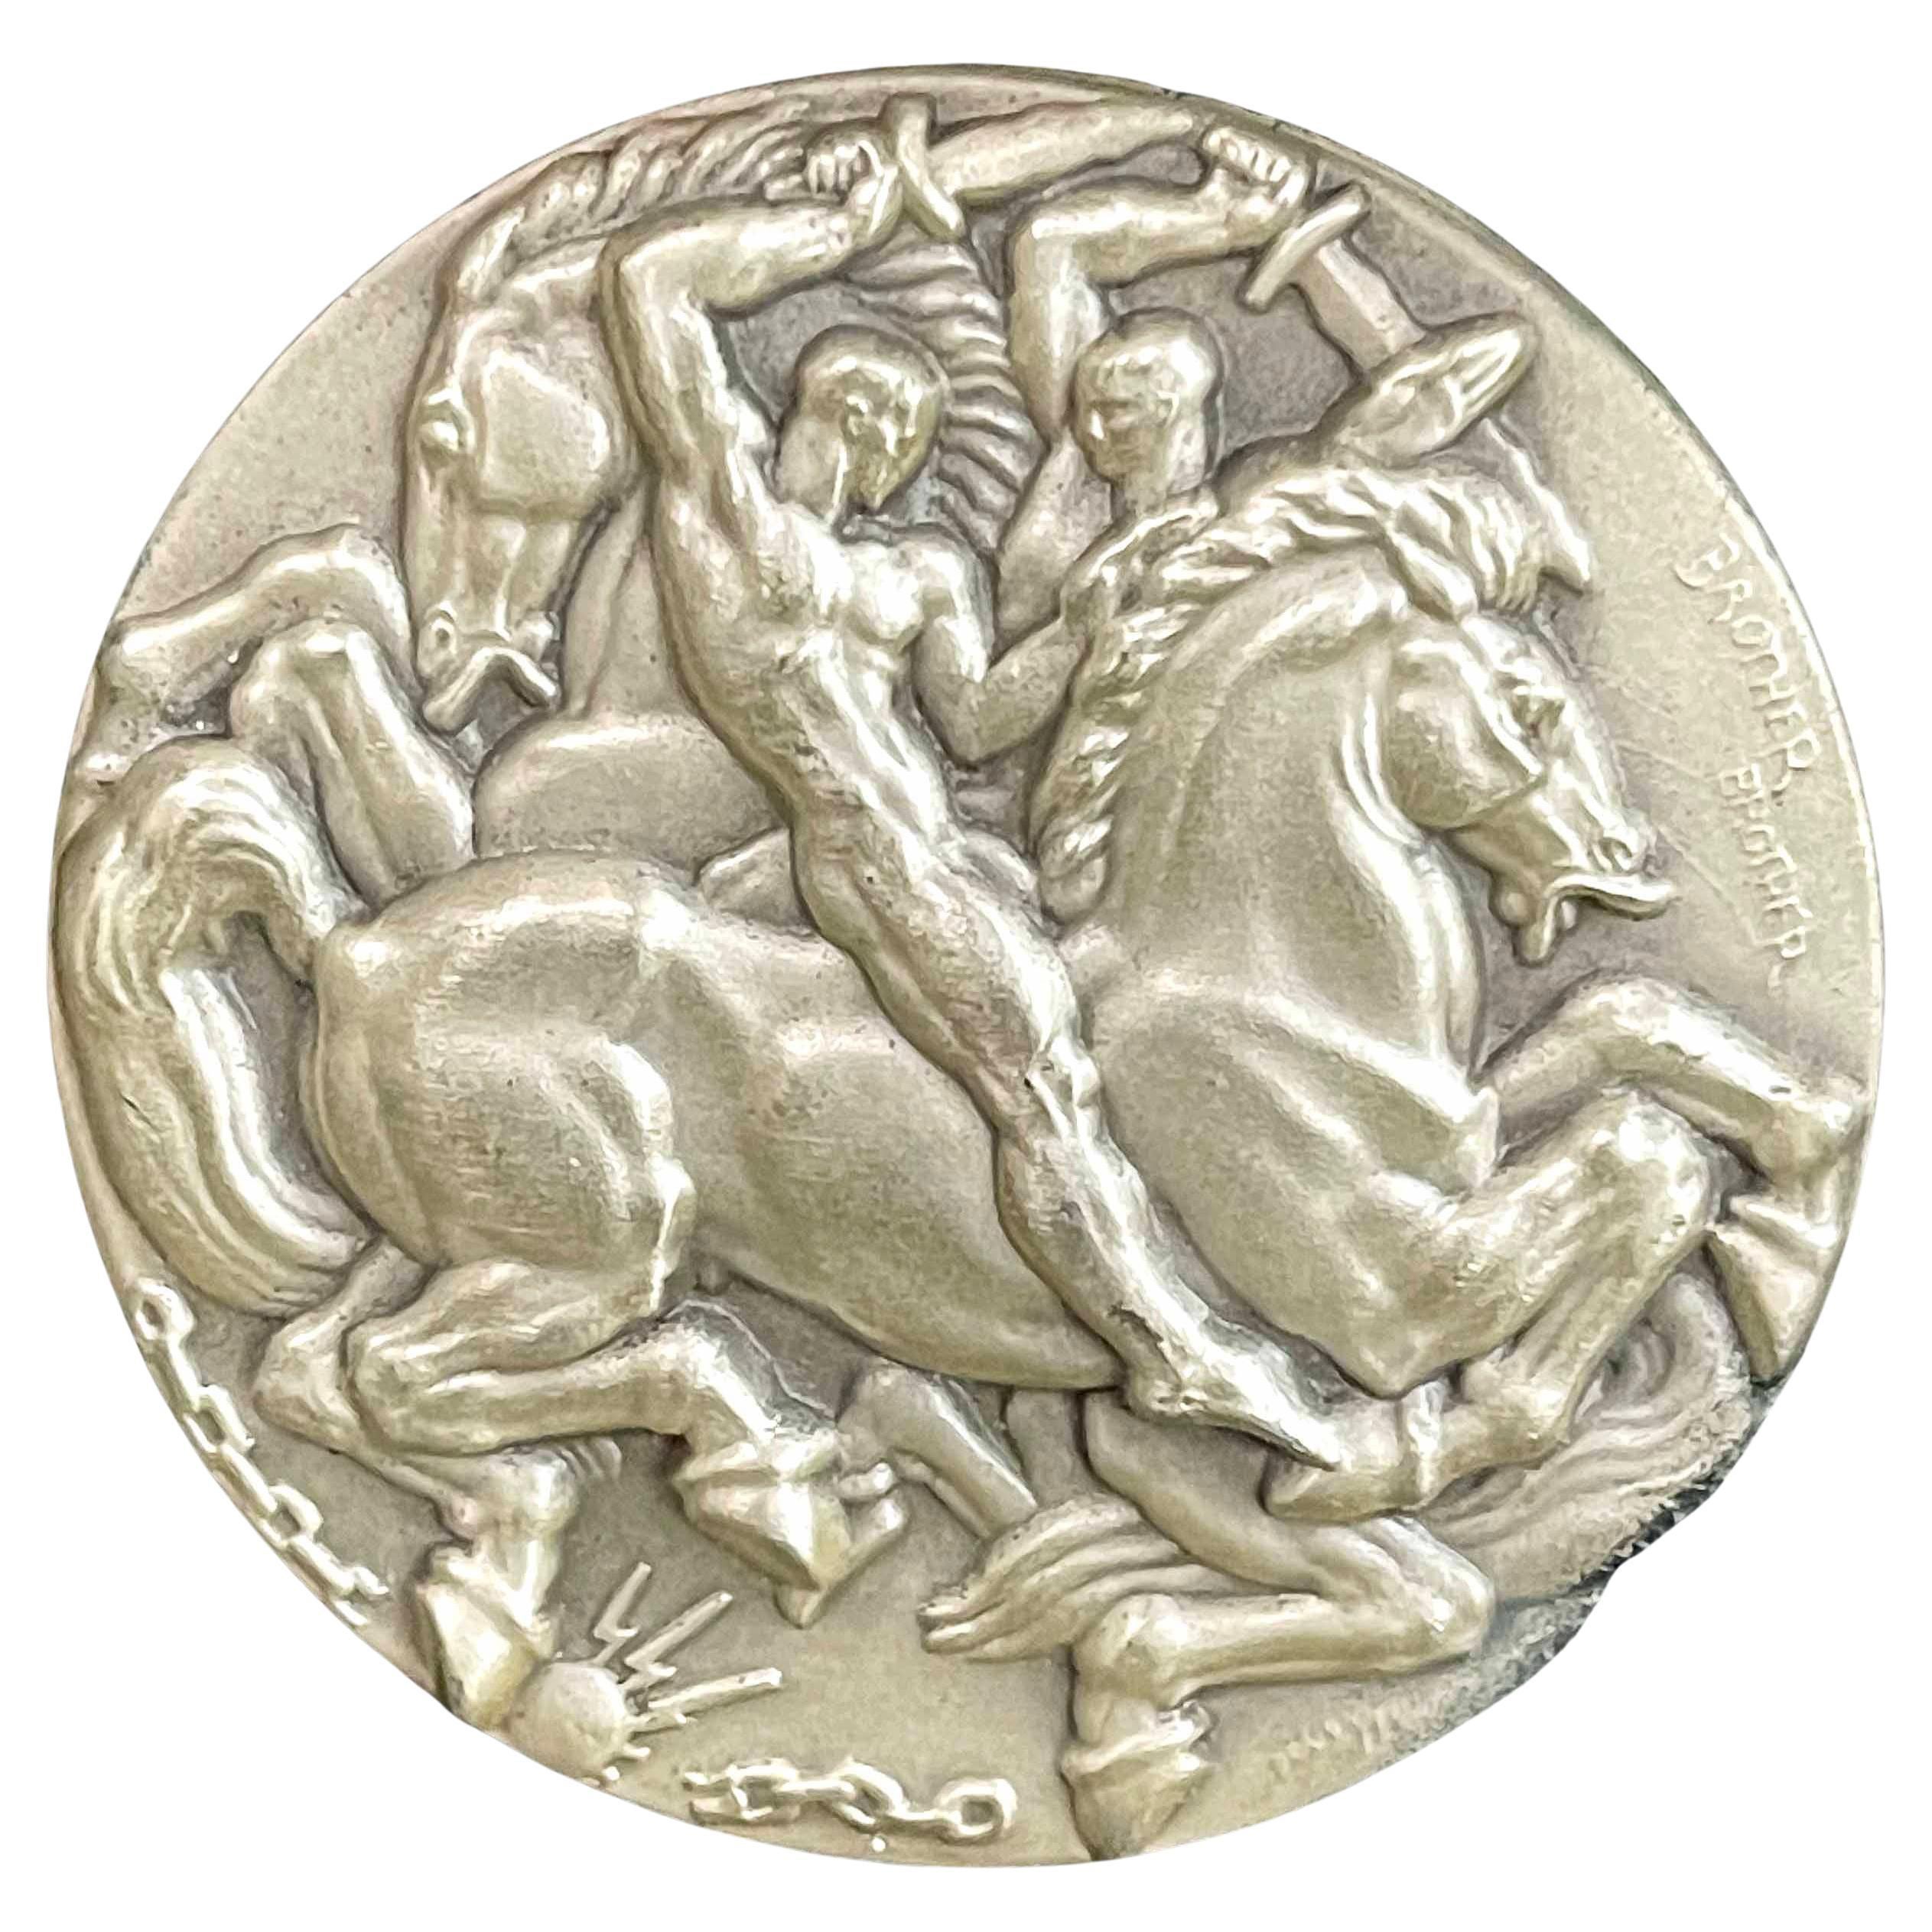 "Brother Against Brother, " Rare Art Deco Silver Medal/Sculptural Piece by De Lue For Sale